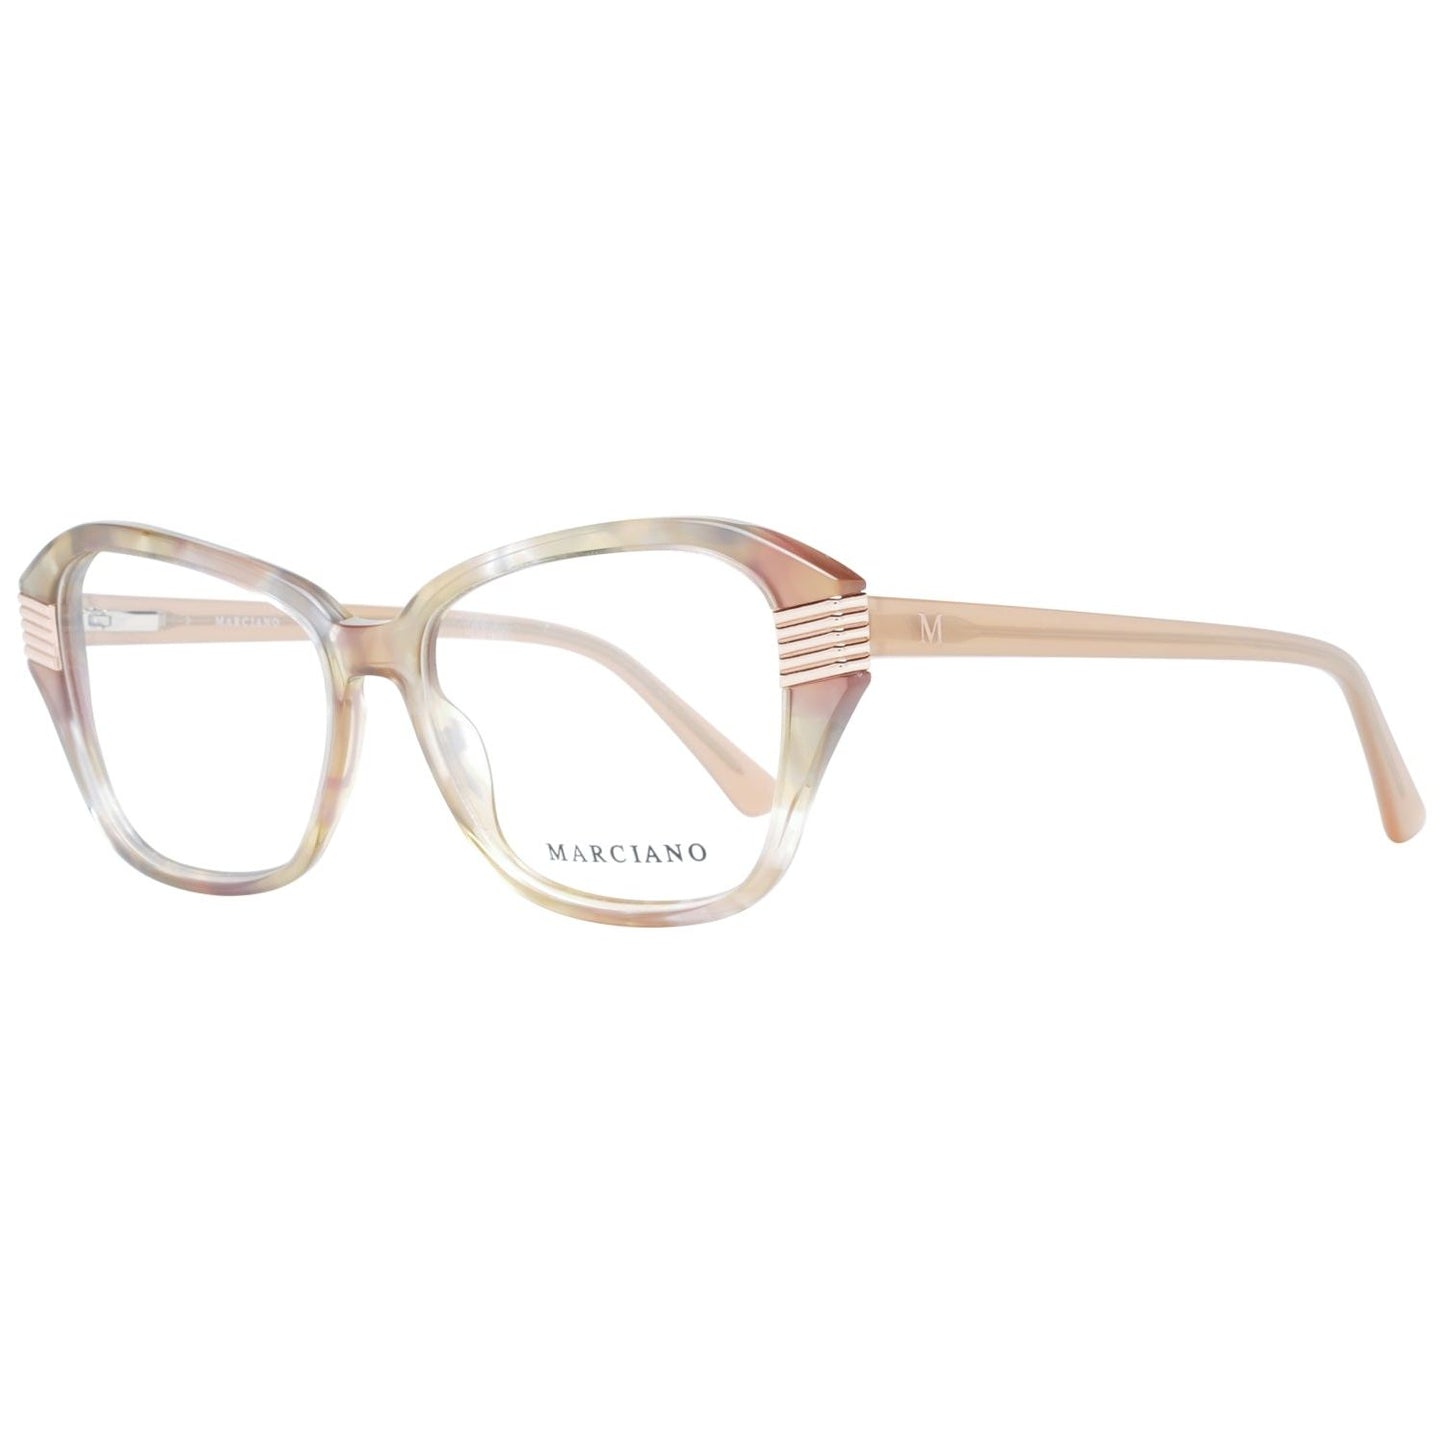 MARCIANO By GUESS EYEWEAR MARCIANO BY GUESS MOD. GM0386 54059 SUNGLASSES & EYEWEAR marciano-by-guess-mod-gm0386-54059